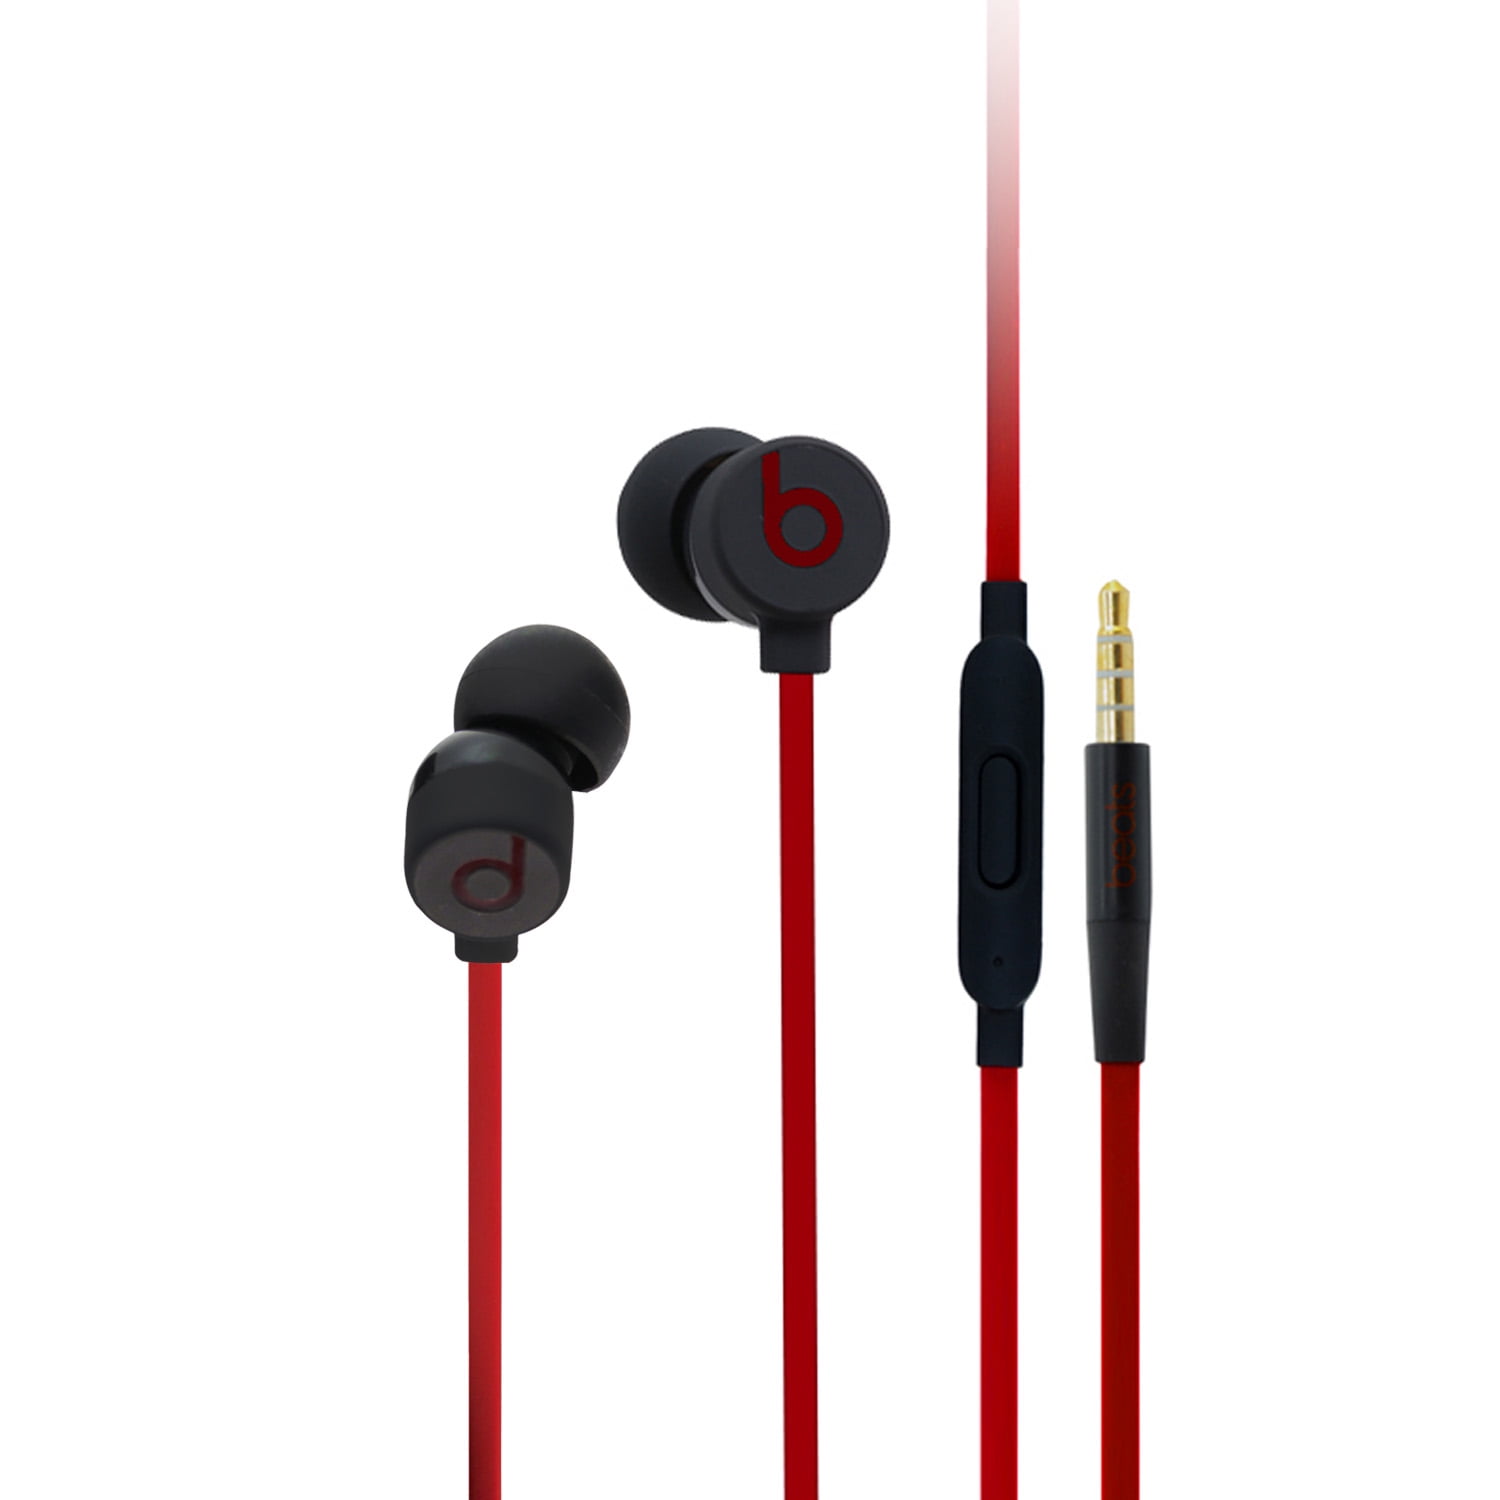 Restored Beats by Dr. Dre Beats urBeats 3 with Line-in Mic Wired 3.5mm Jack Noise Isolating, Black/Red (Refurbished) - Walmart.com